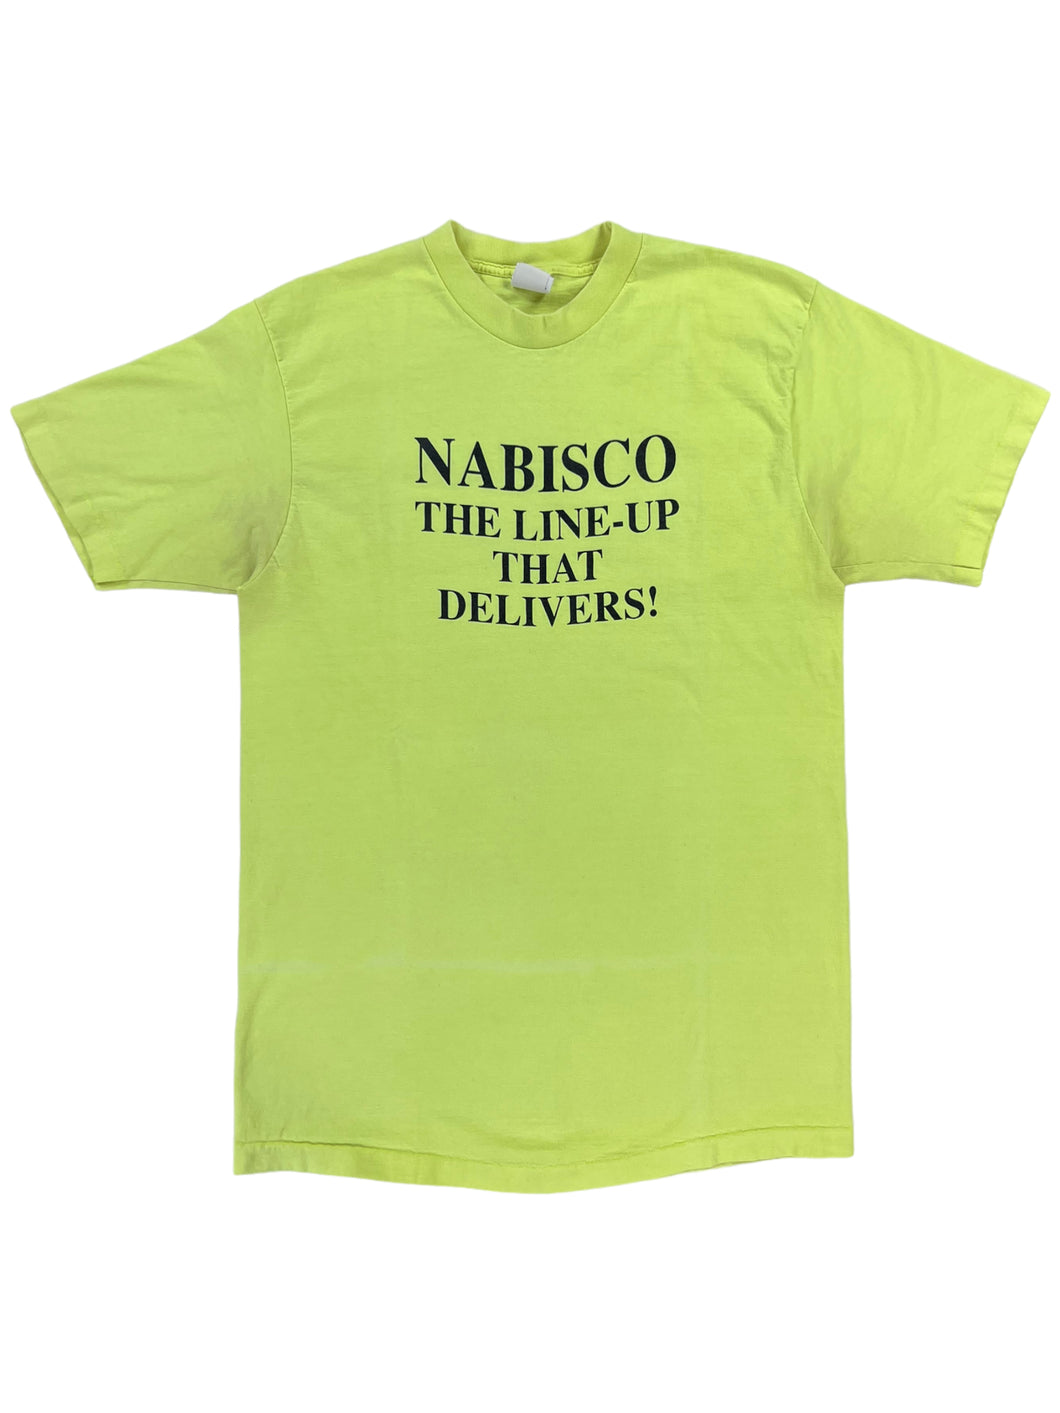 Vintage 90s Nabisco the line-up that delivers! 163 million servings daily neon tee (OS)